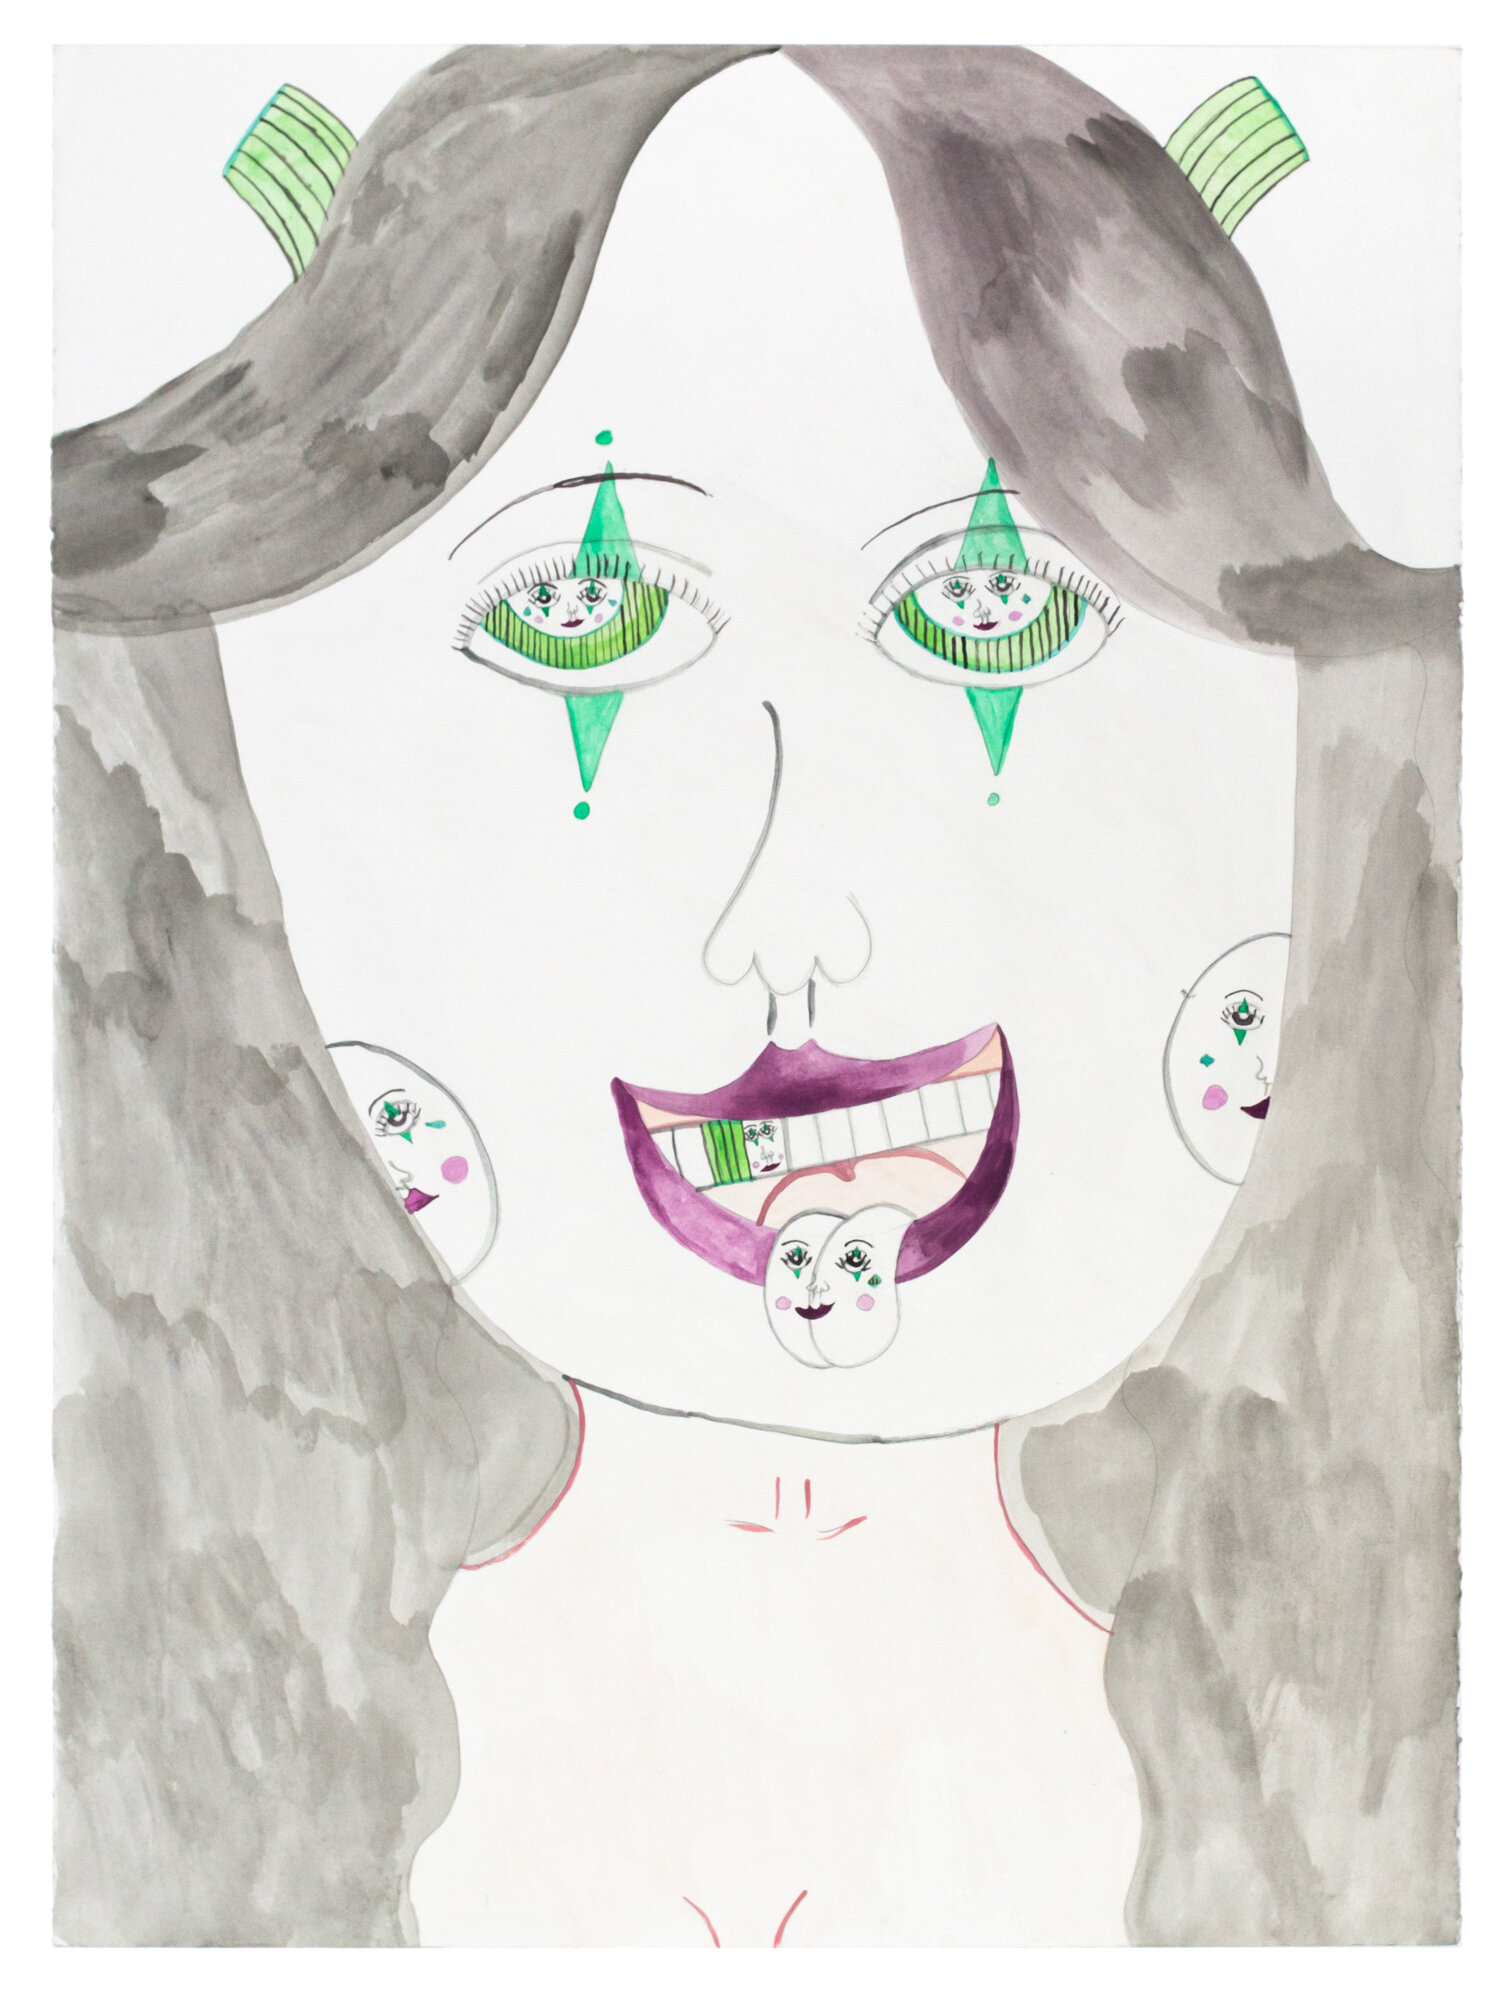 Aurie Ramirez, Untitled (AR 443), 2014, Watercolor on paper, 22.25 x 30 inches